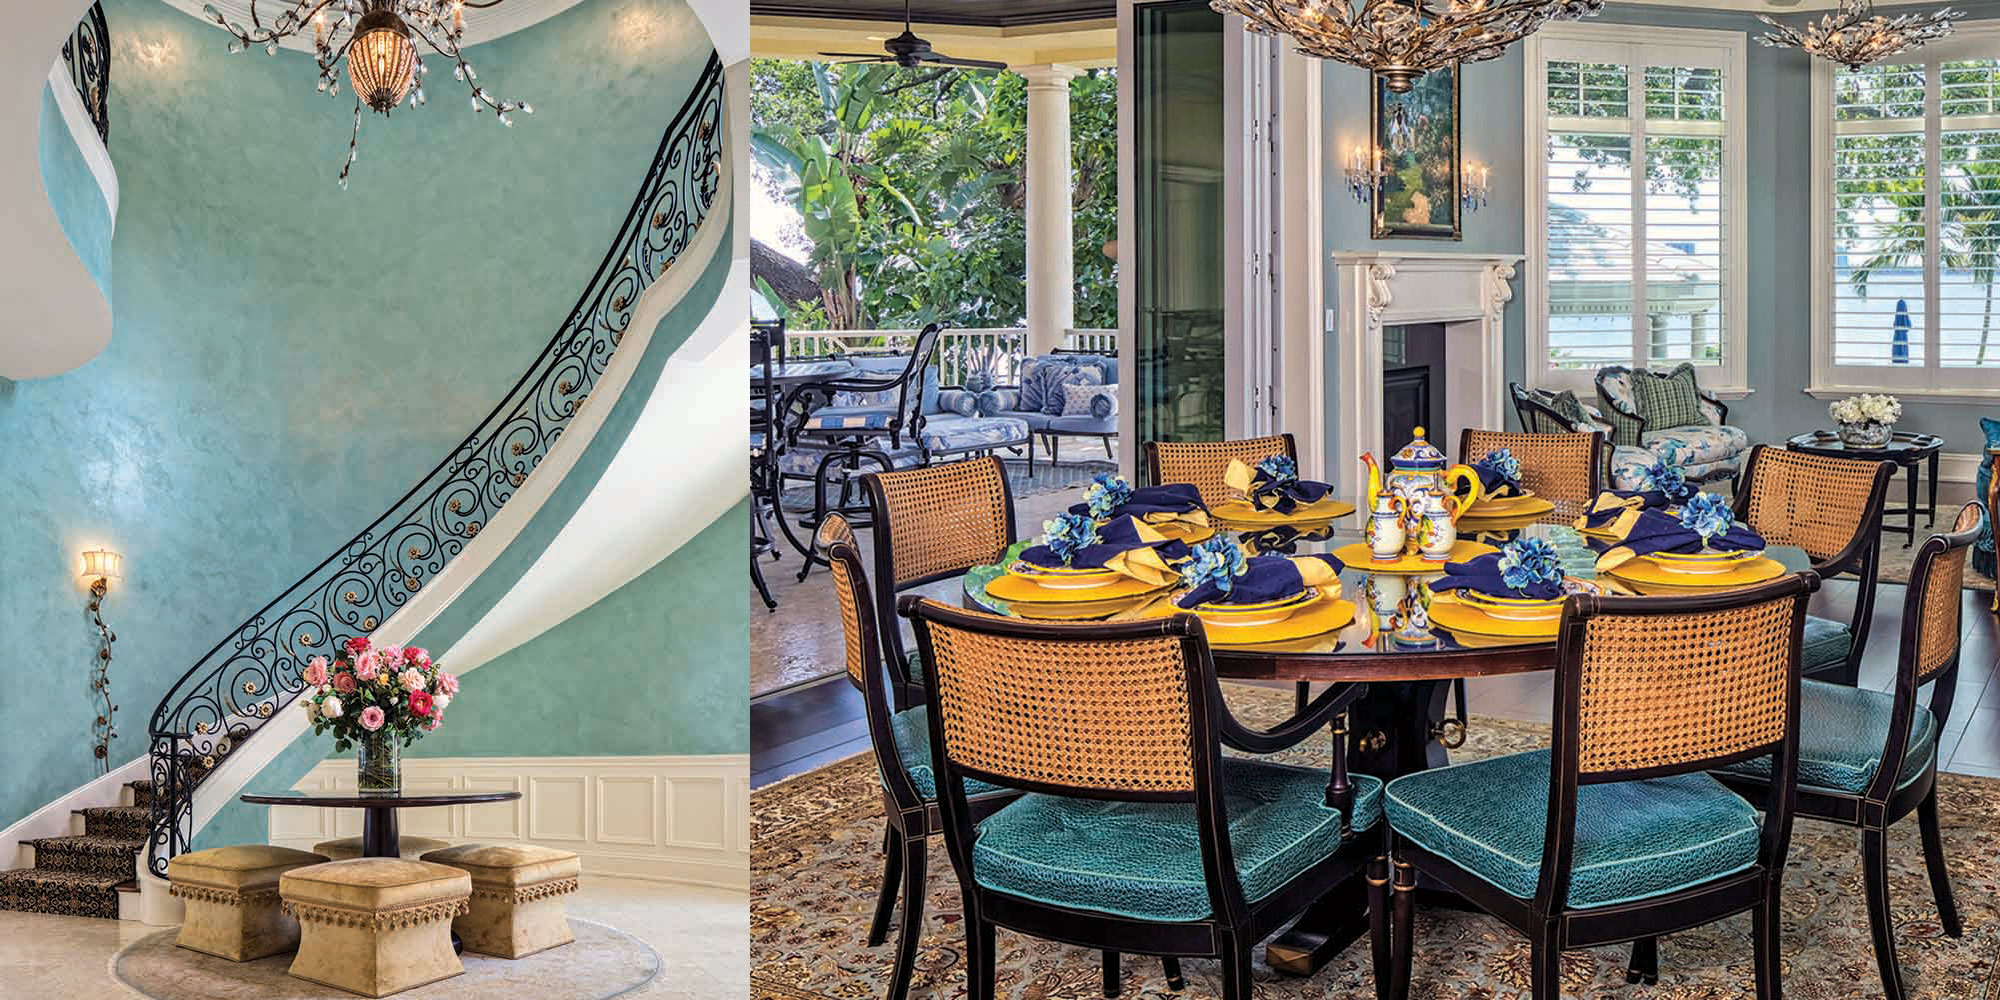 (left) A breathtaking entry foyer features a sophisticated curved staircase, an ornate, dazzling chandelier and a sea-inspired teal wall. (right) The indoor and outdoor spaces were designed to seamlessly flow. A retractable glass wall opens up this breakfast cafe to for easy access to a covered outdoor sitting area.